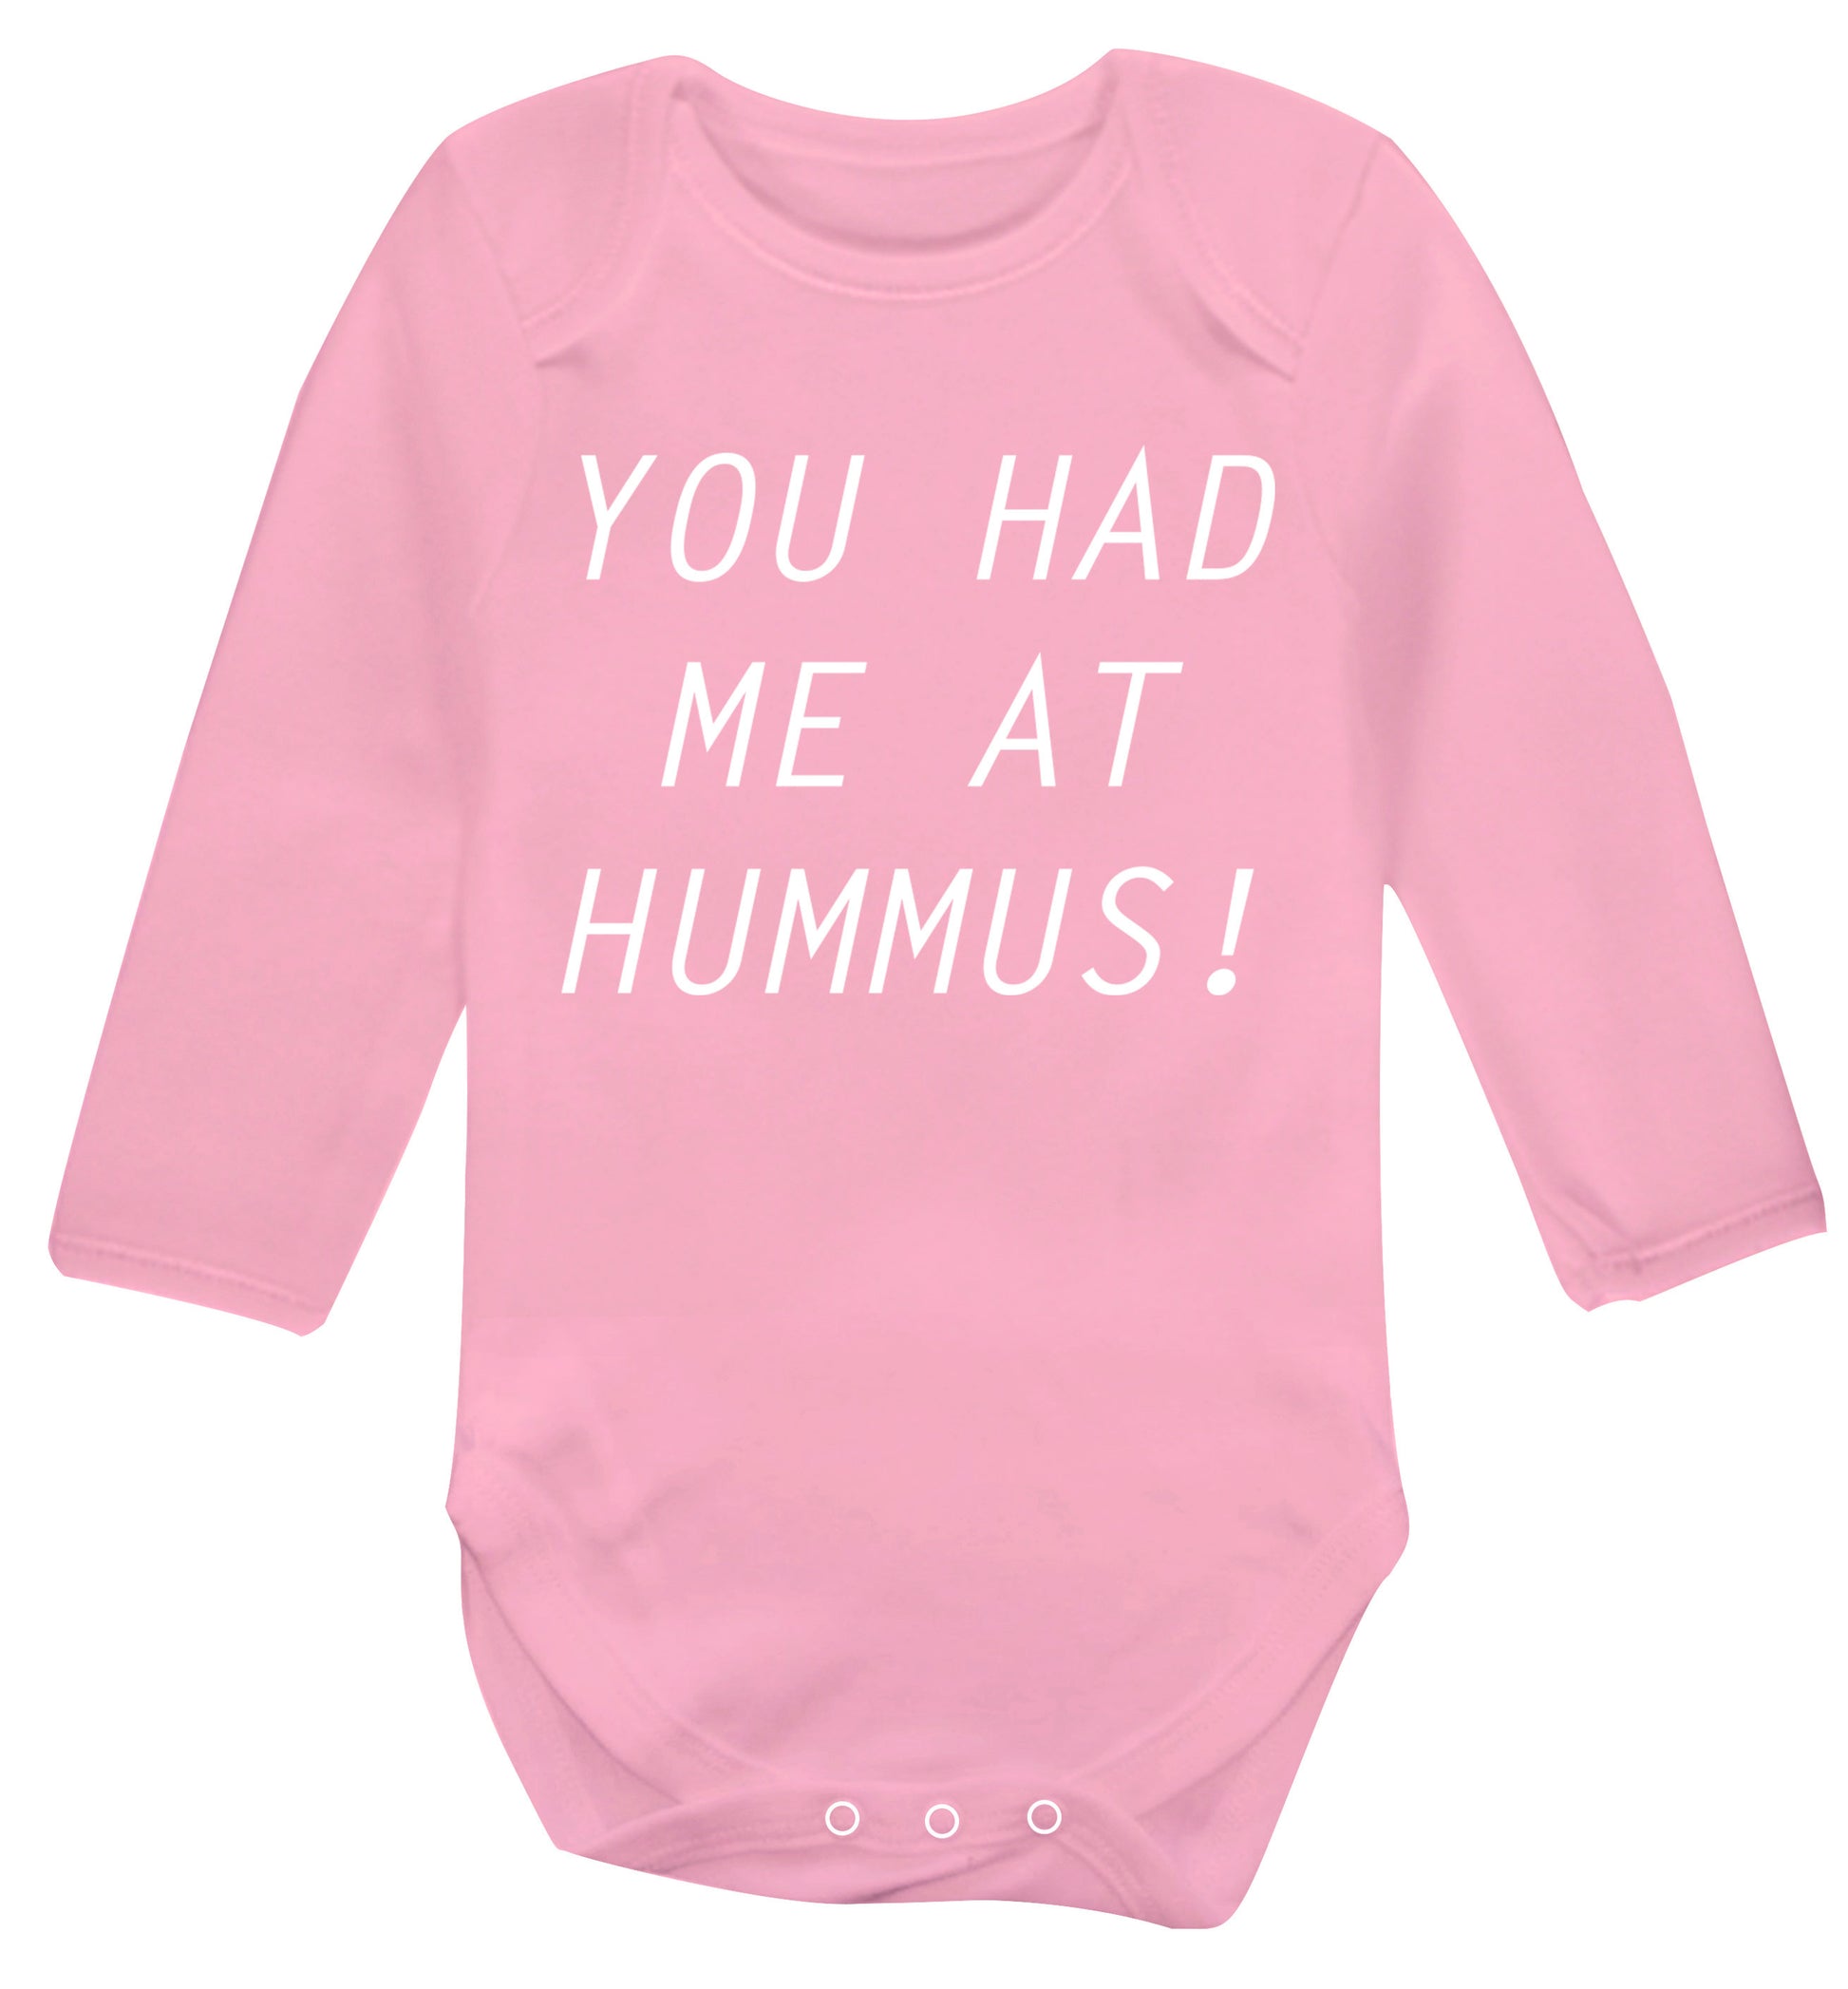 You had me at hummus Baby Vest long sleeved pale pink 6-12 months